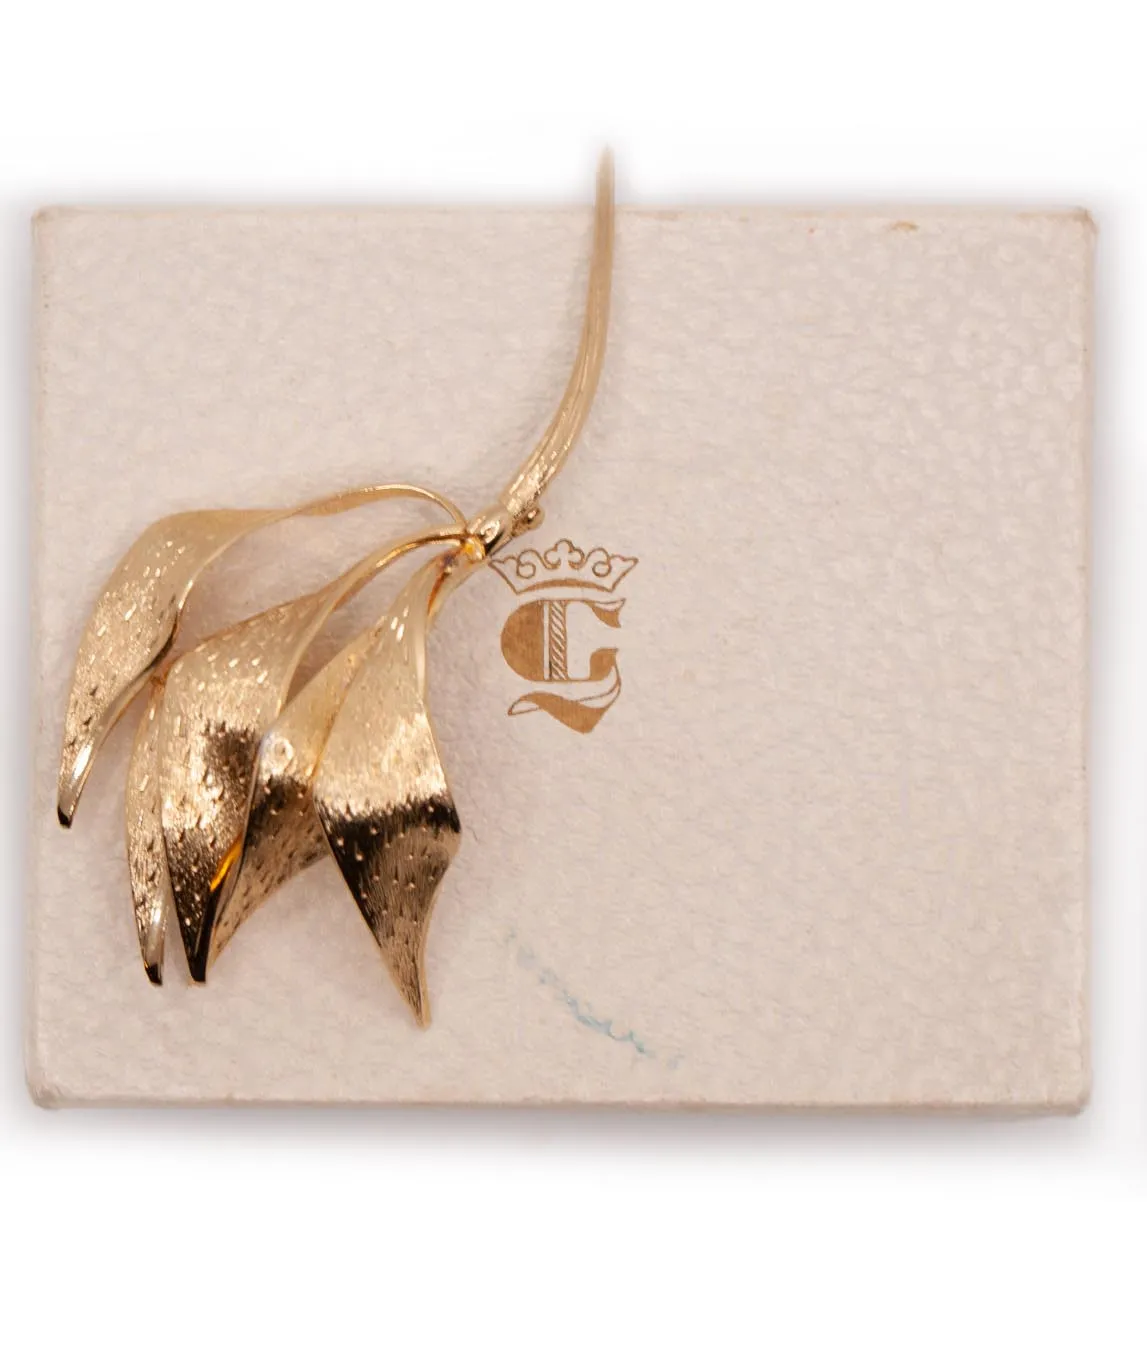 Gold-plated multi-leaf brooch by Henkel and Grosse with textured metal leaves with box